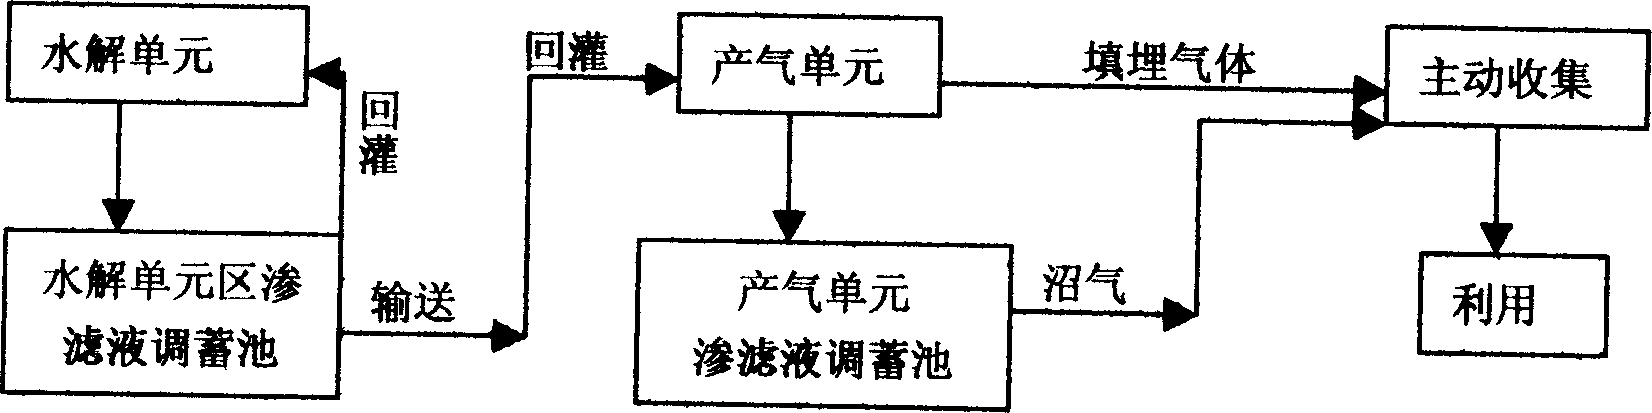 Dumping method for producing garbage dumping gas by using special garbage filling units